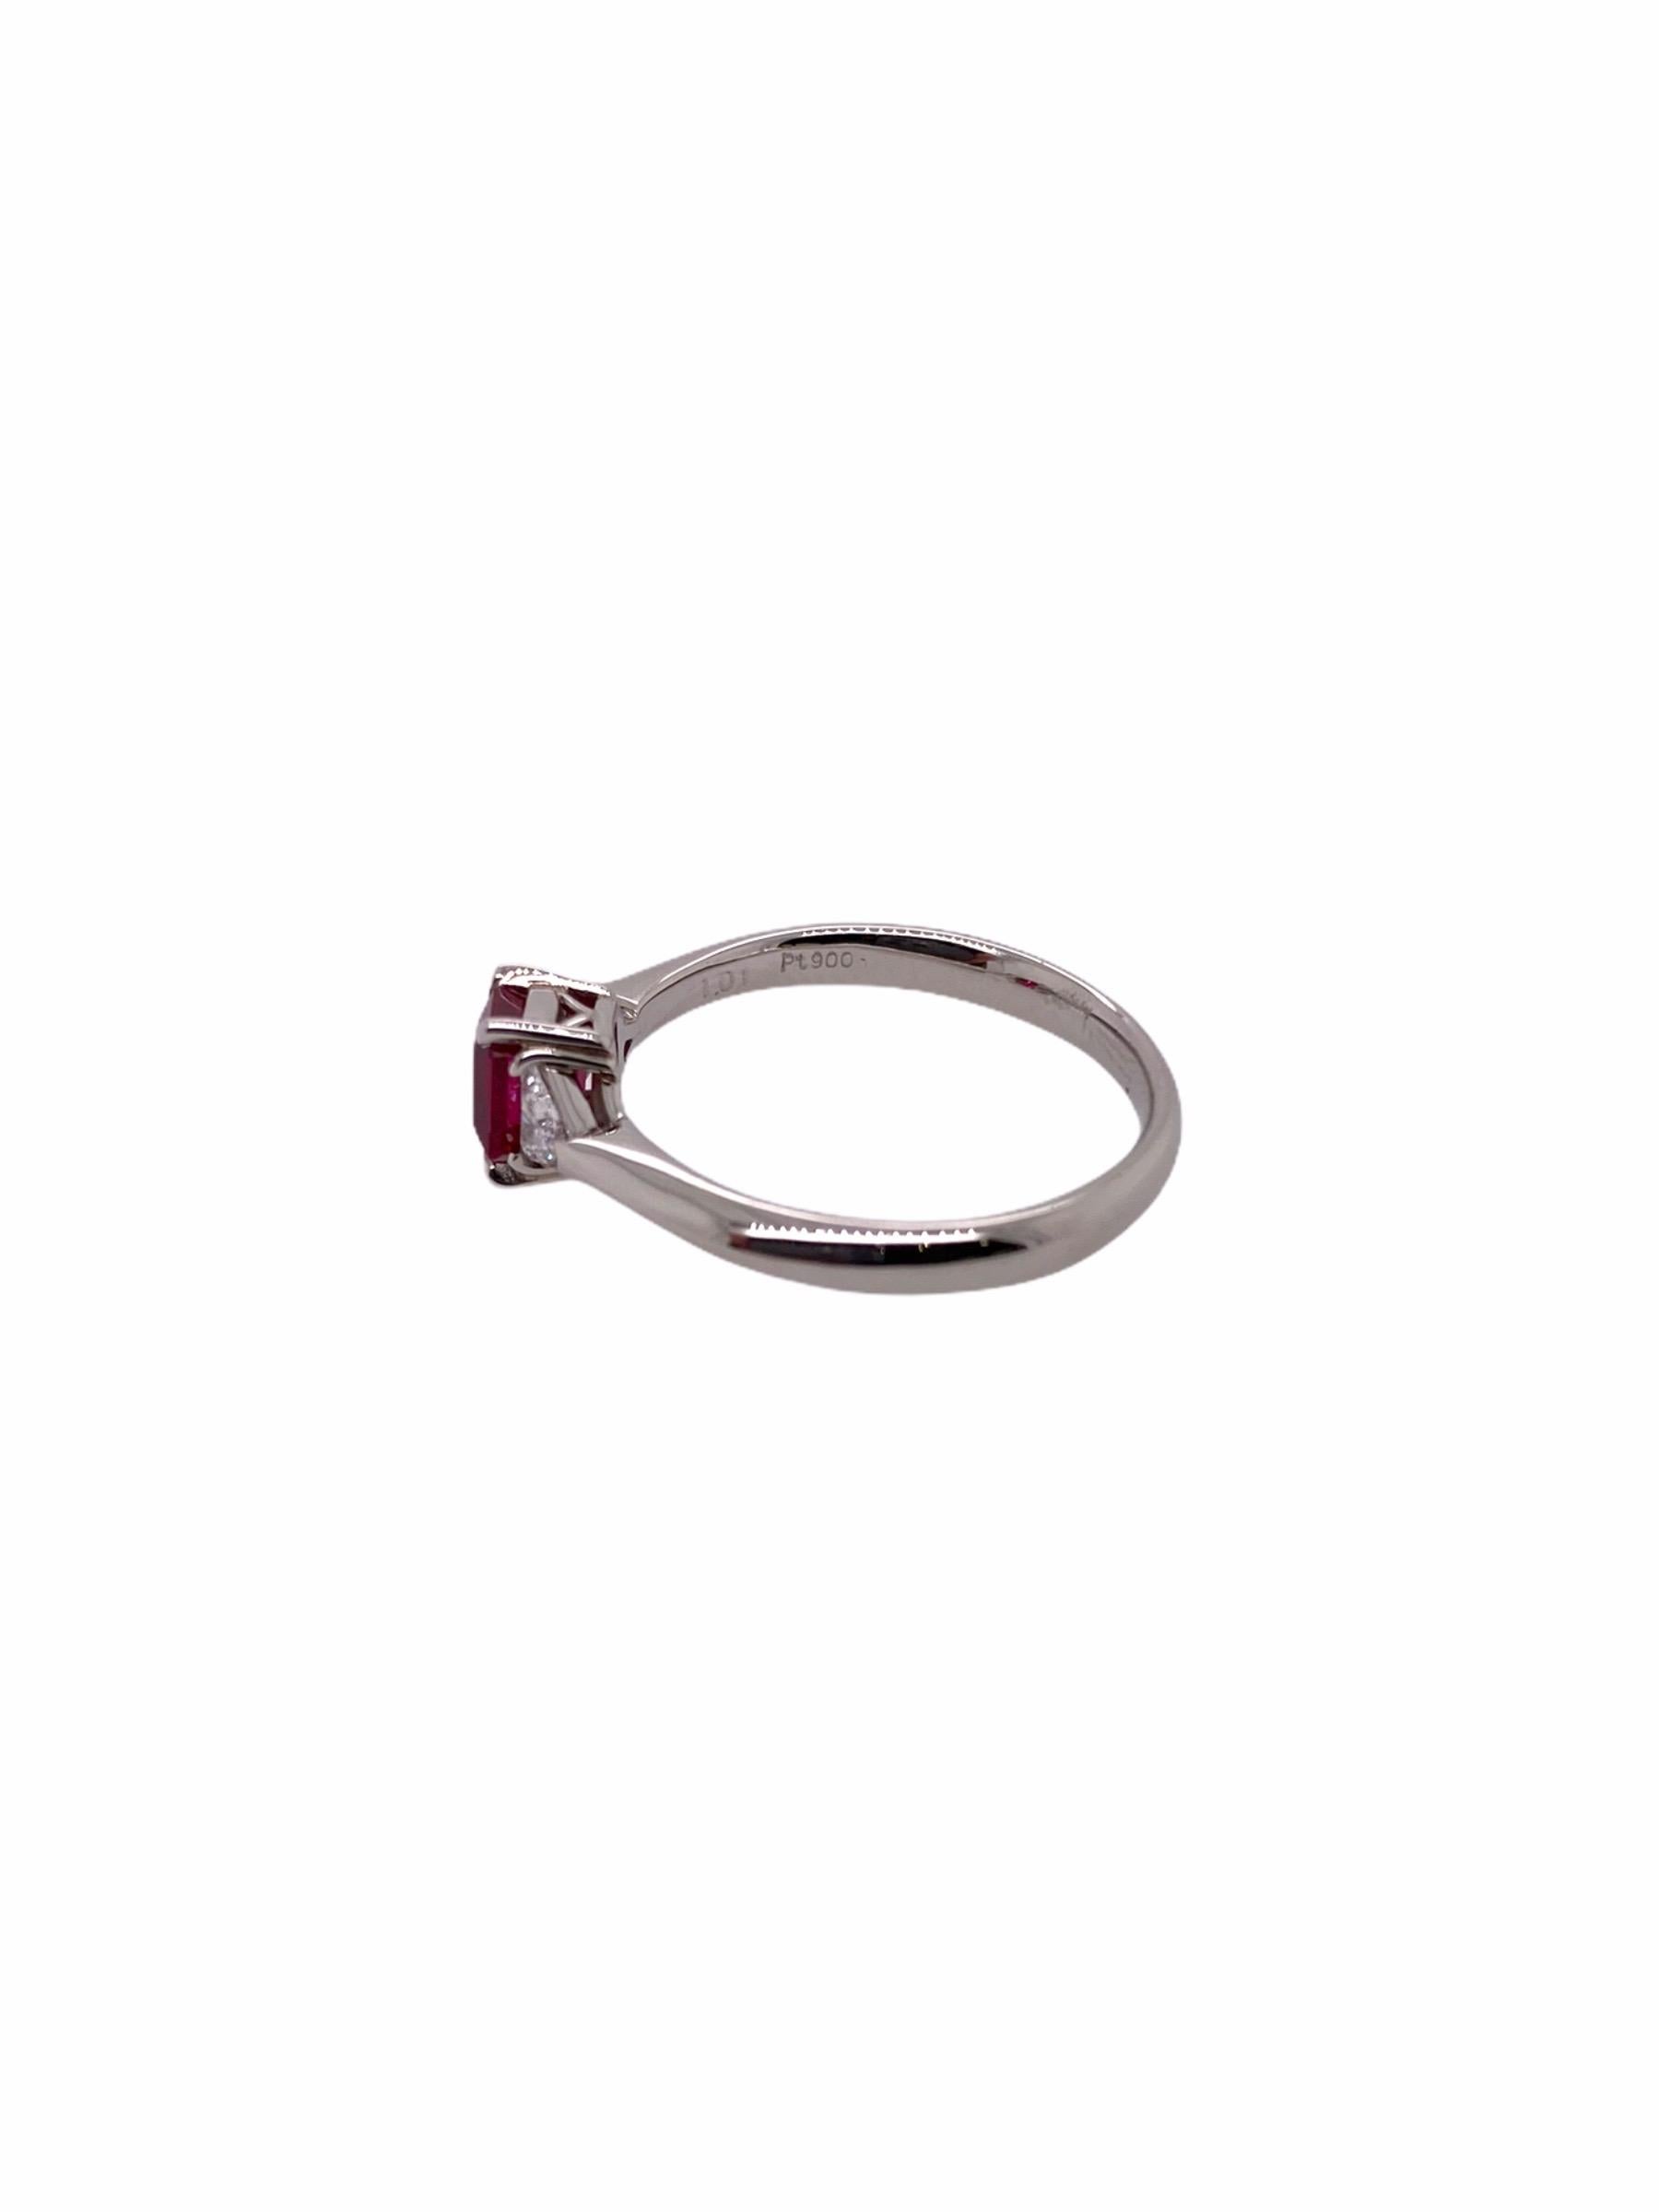 Modern Paris Craft House GIA Certified 1.01ct Ruby Diamond Three-Stone Ring For Sale